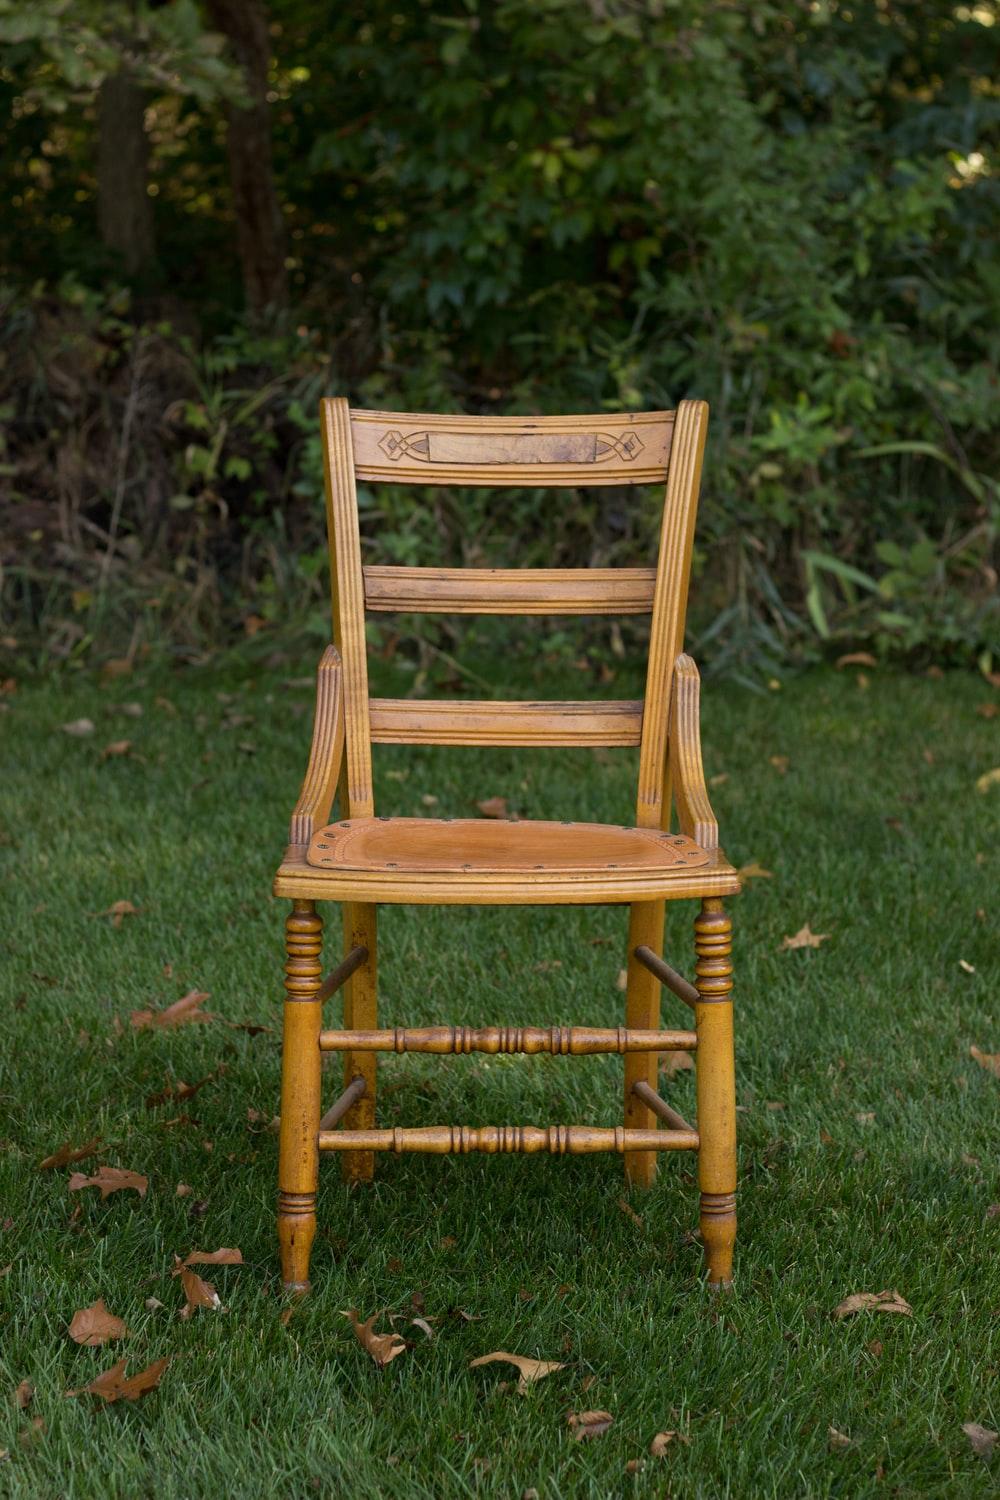 Chair Picture. Download Free Image